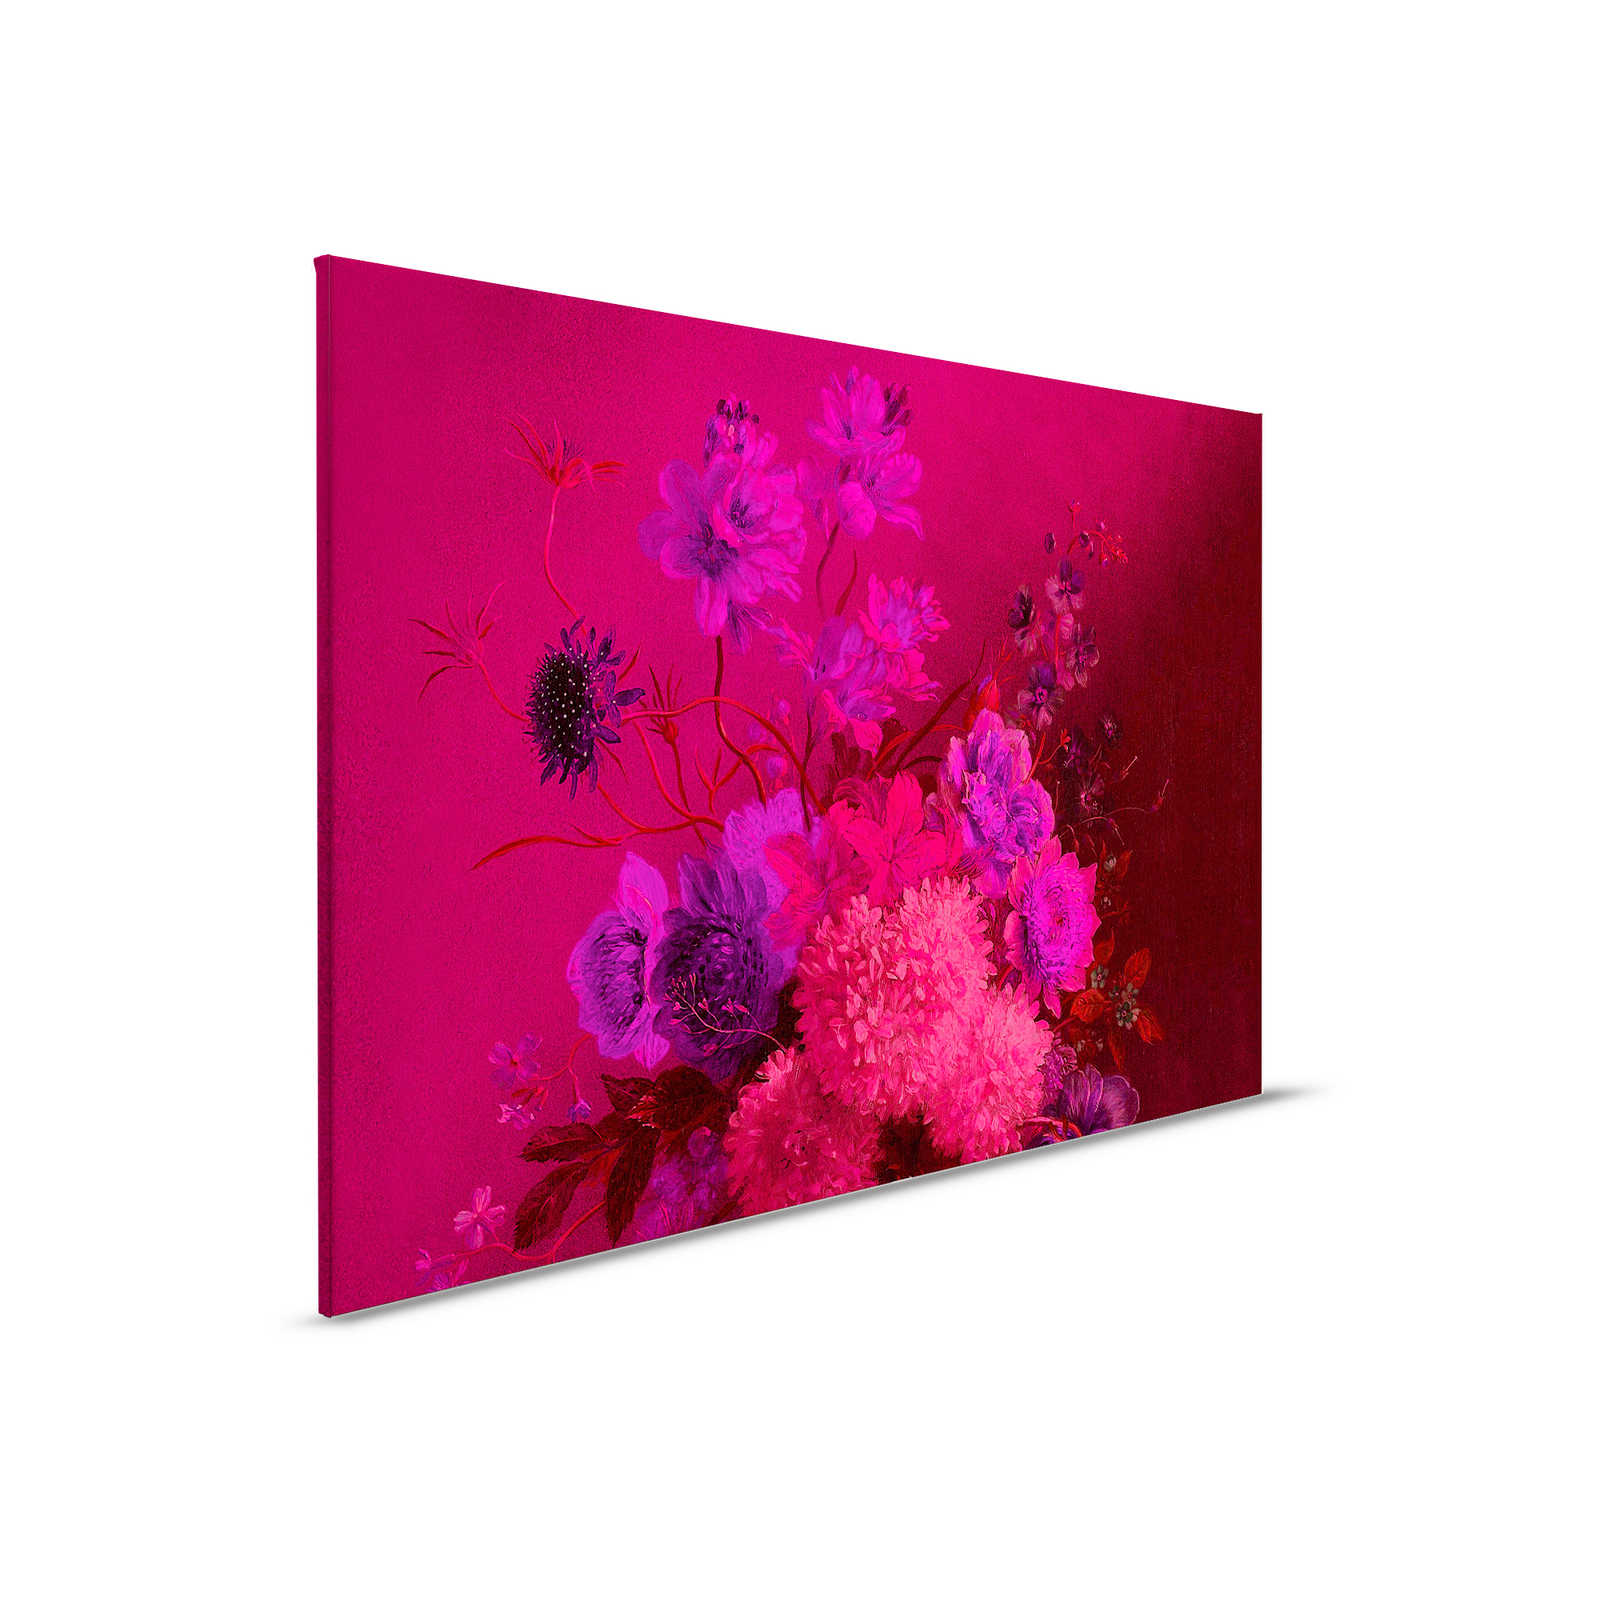         Neon Canvas Painting with Flowers Still Life | bouquet Vibran 2 - 0.90 m x 0.60 m
    